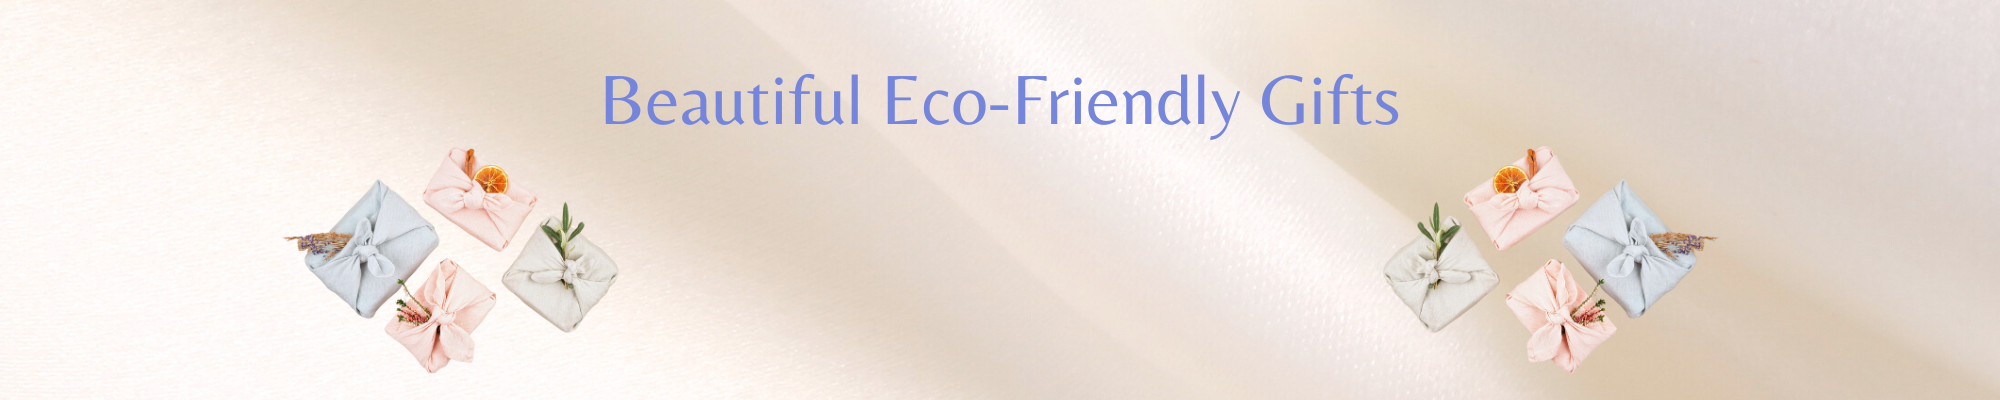 Twizzle Designs is an eco-friendly gifts store and a proud Australian business. Quality, sustainable, Australian made gifts for eco aware friends. An Earth friendly business making it easy to find the best Australian eco-gifts.